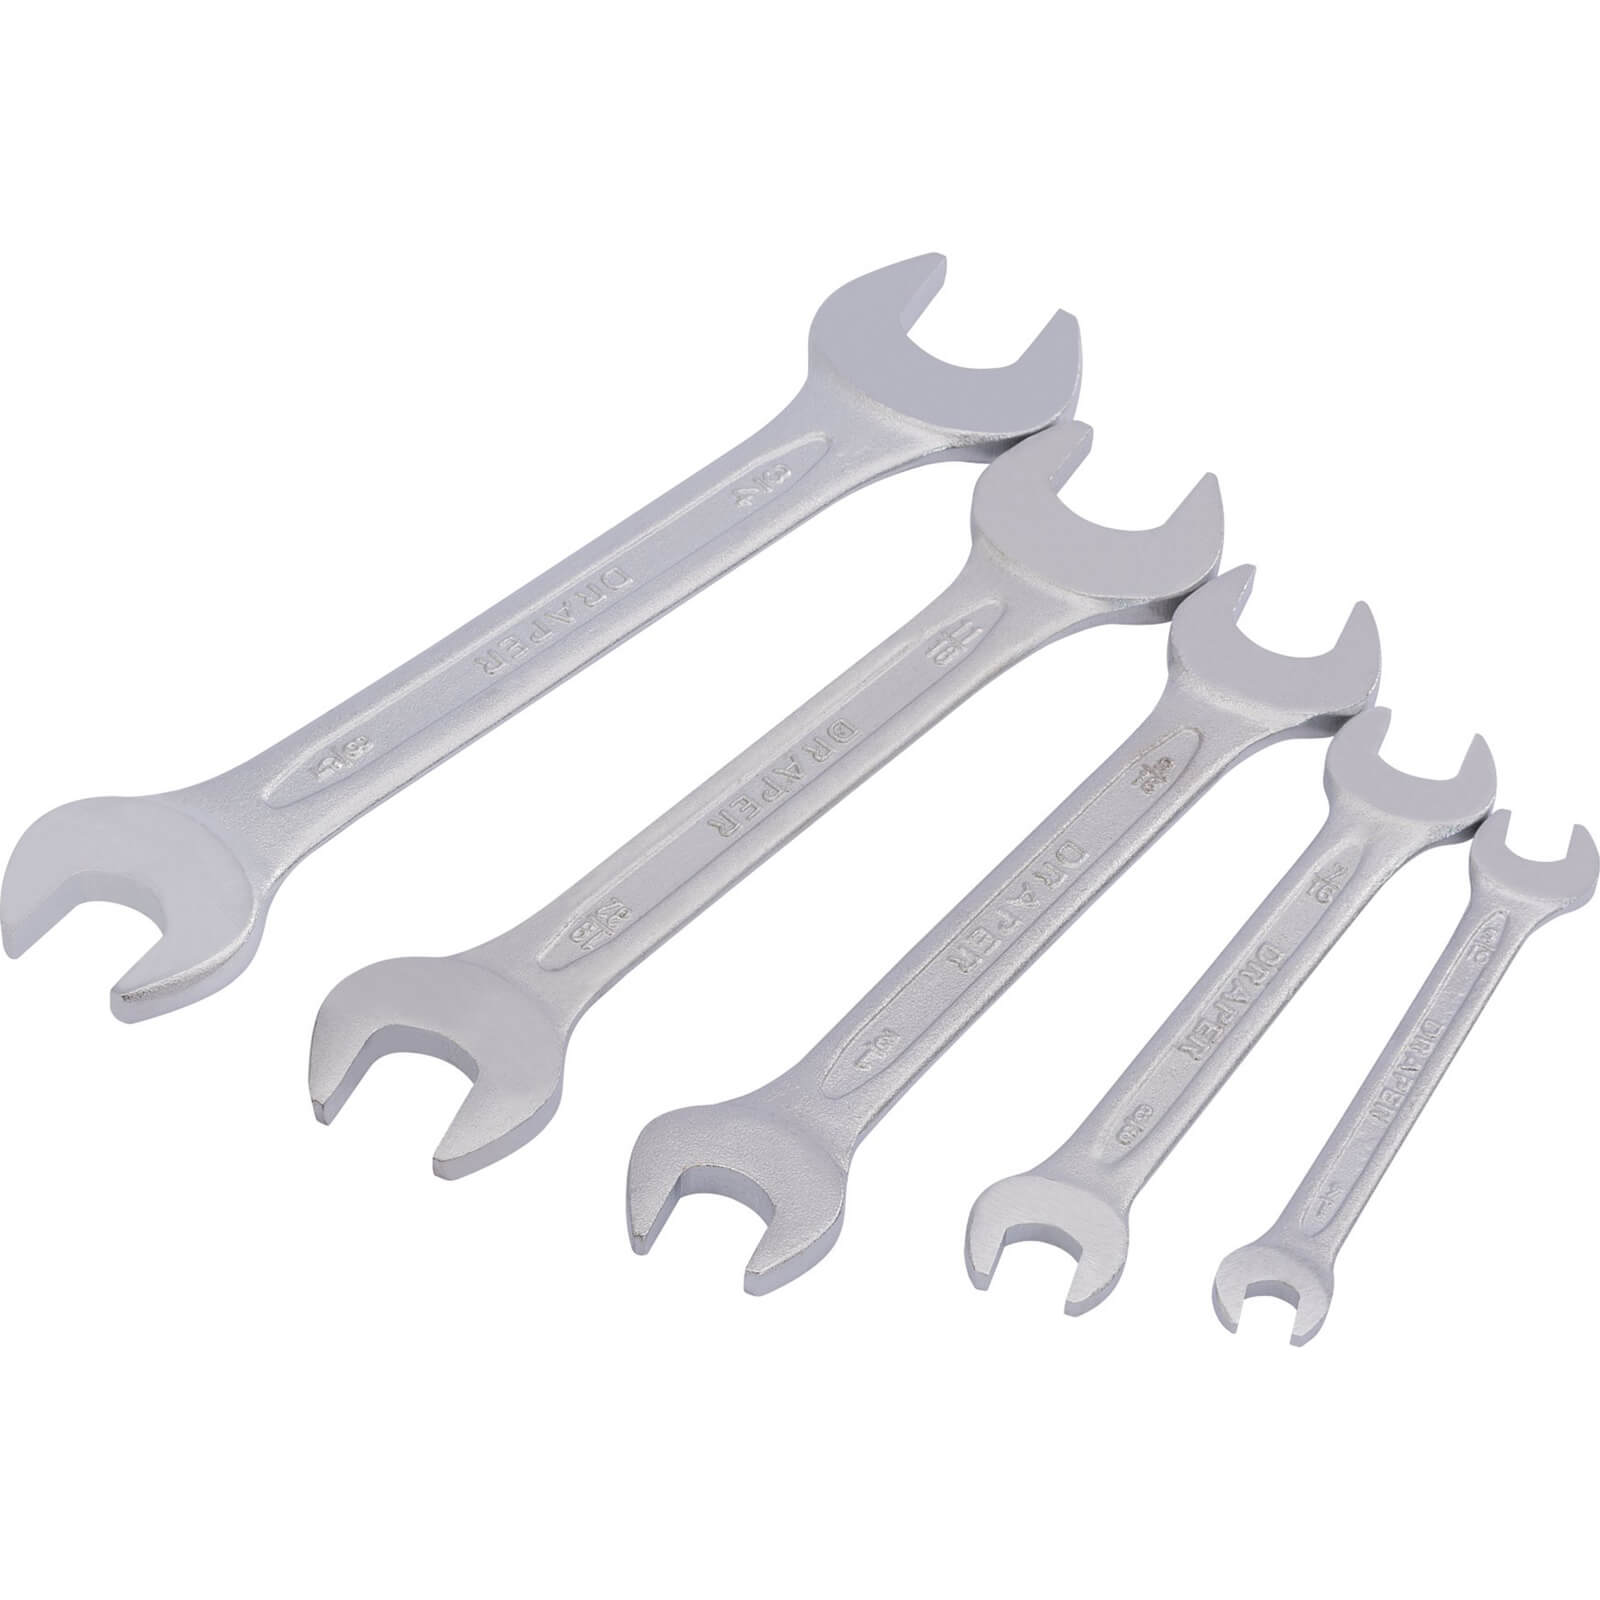 Image of Draper 5 Piece Double Open End Spanner Set Imperial